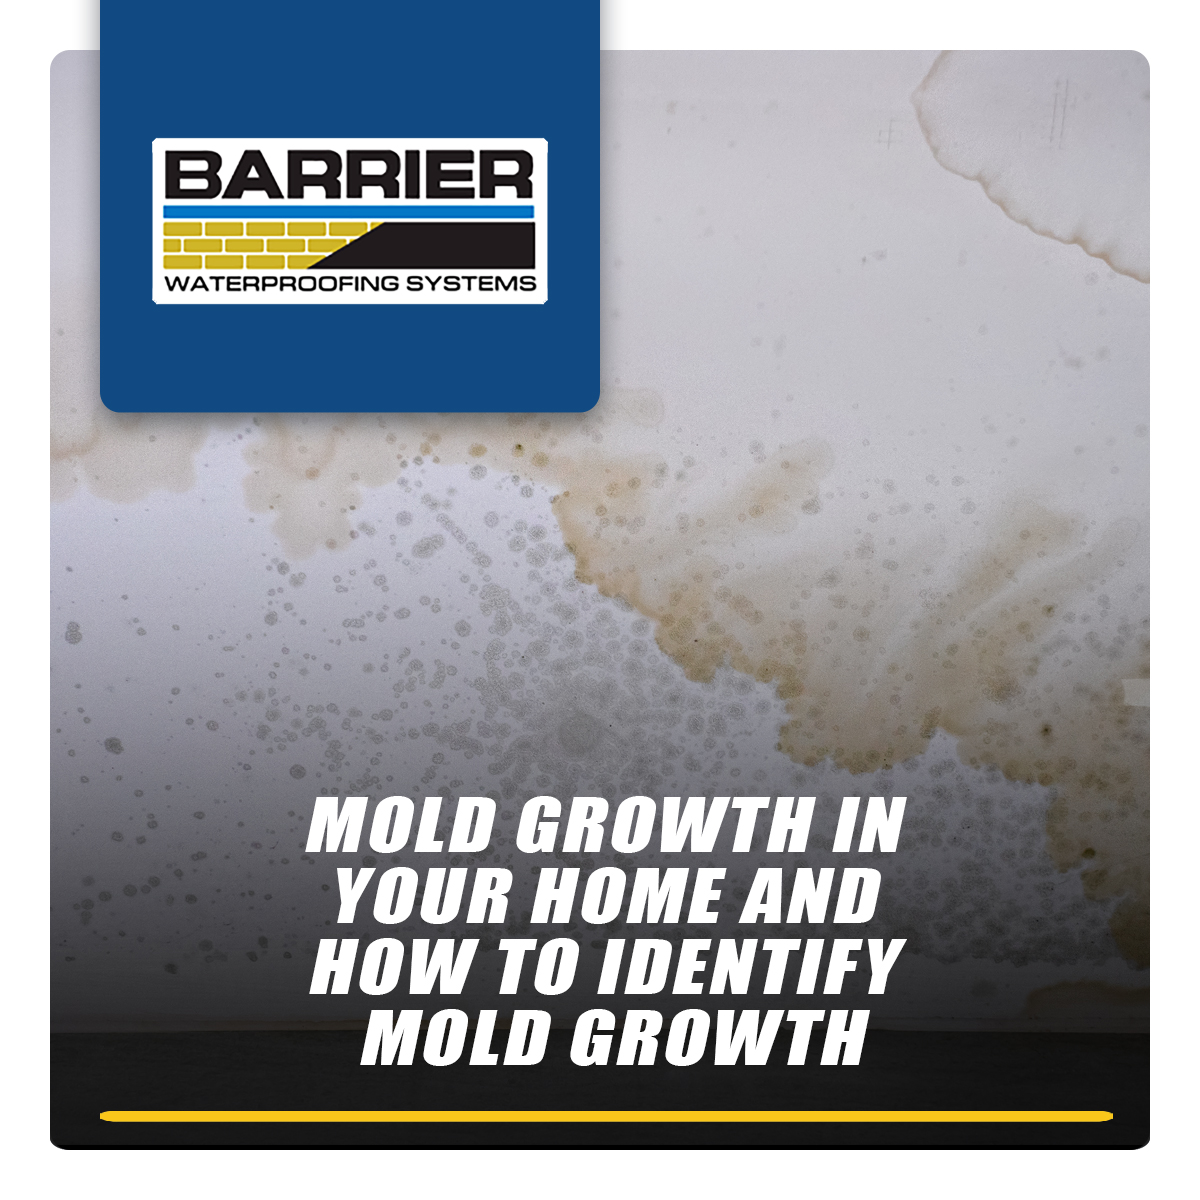 Mold Growth In Your Home and How To Identify Mold Growth